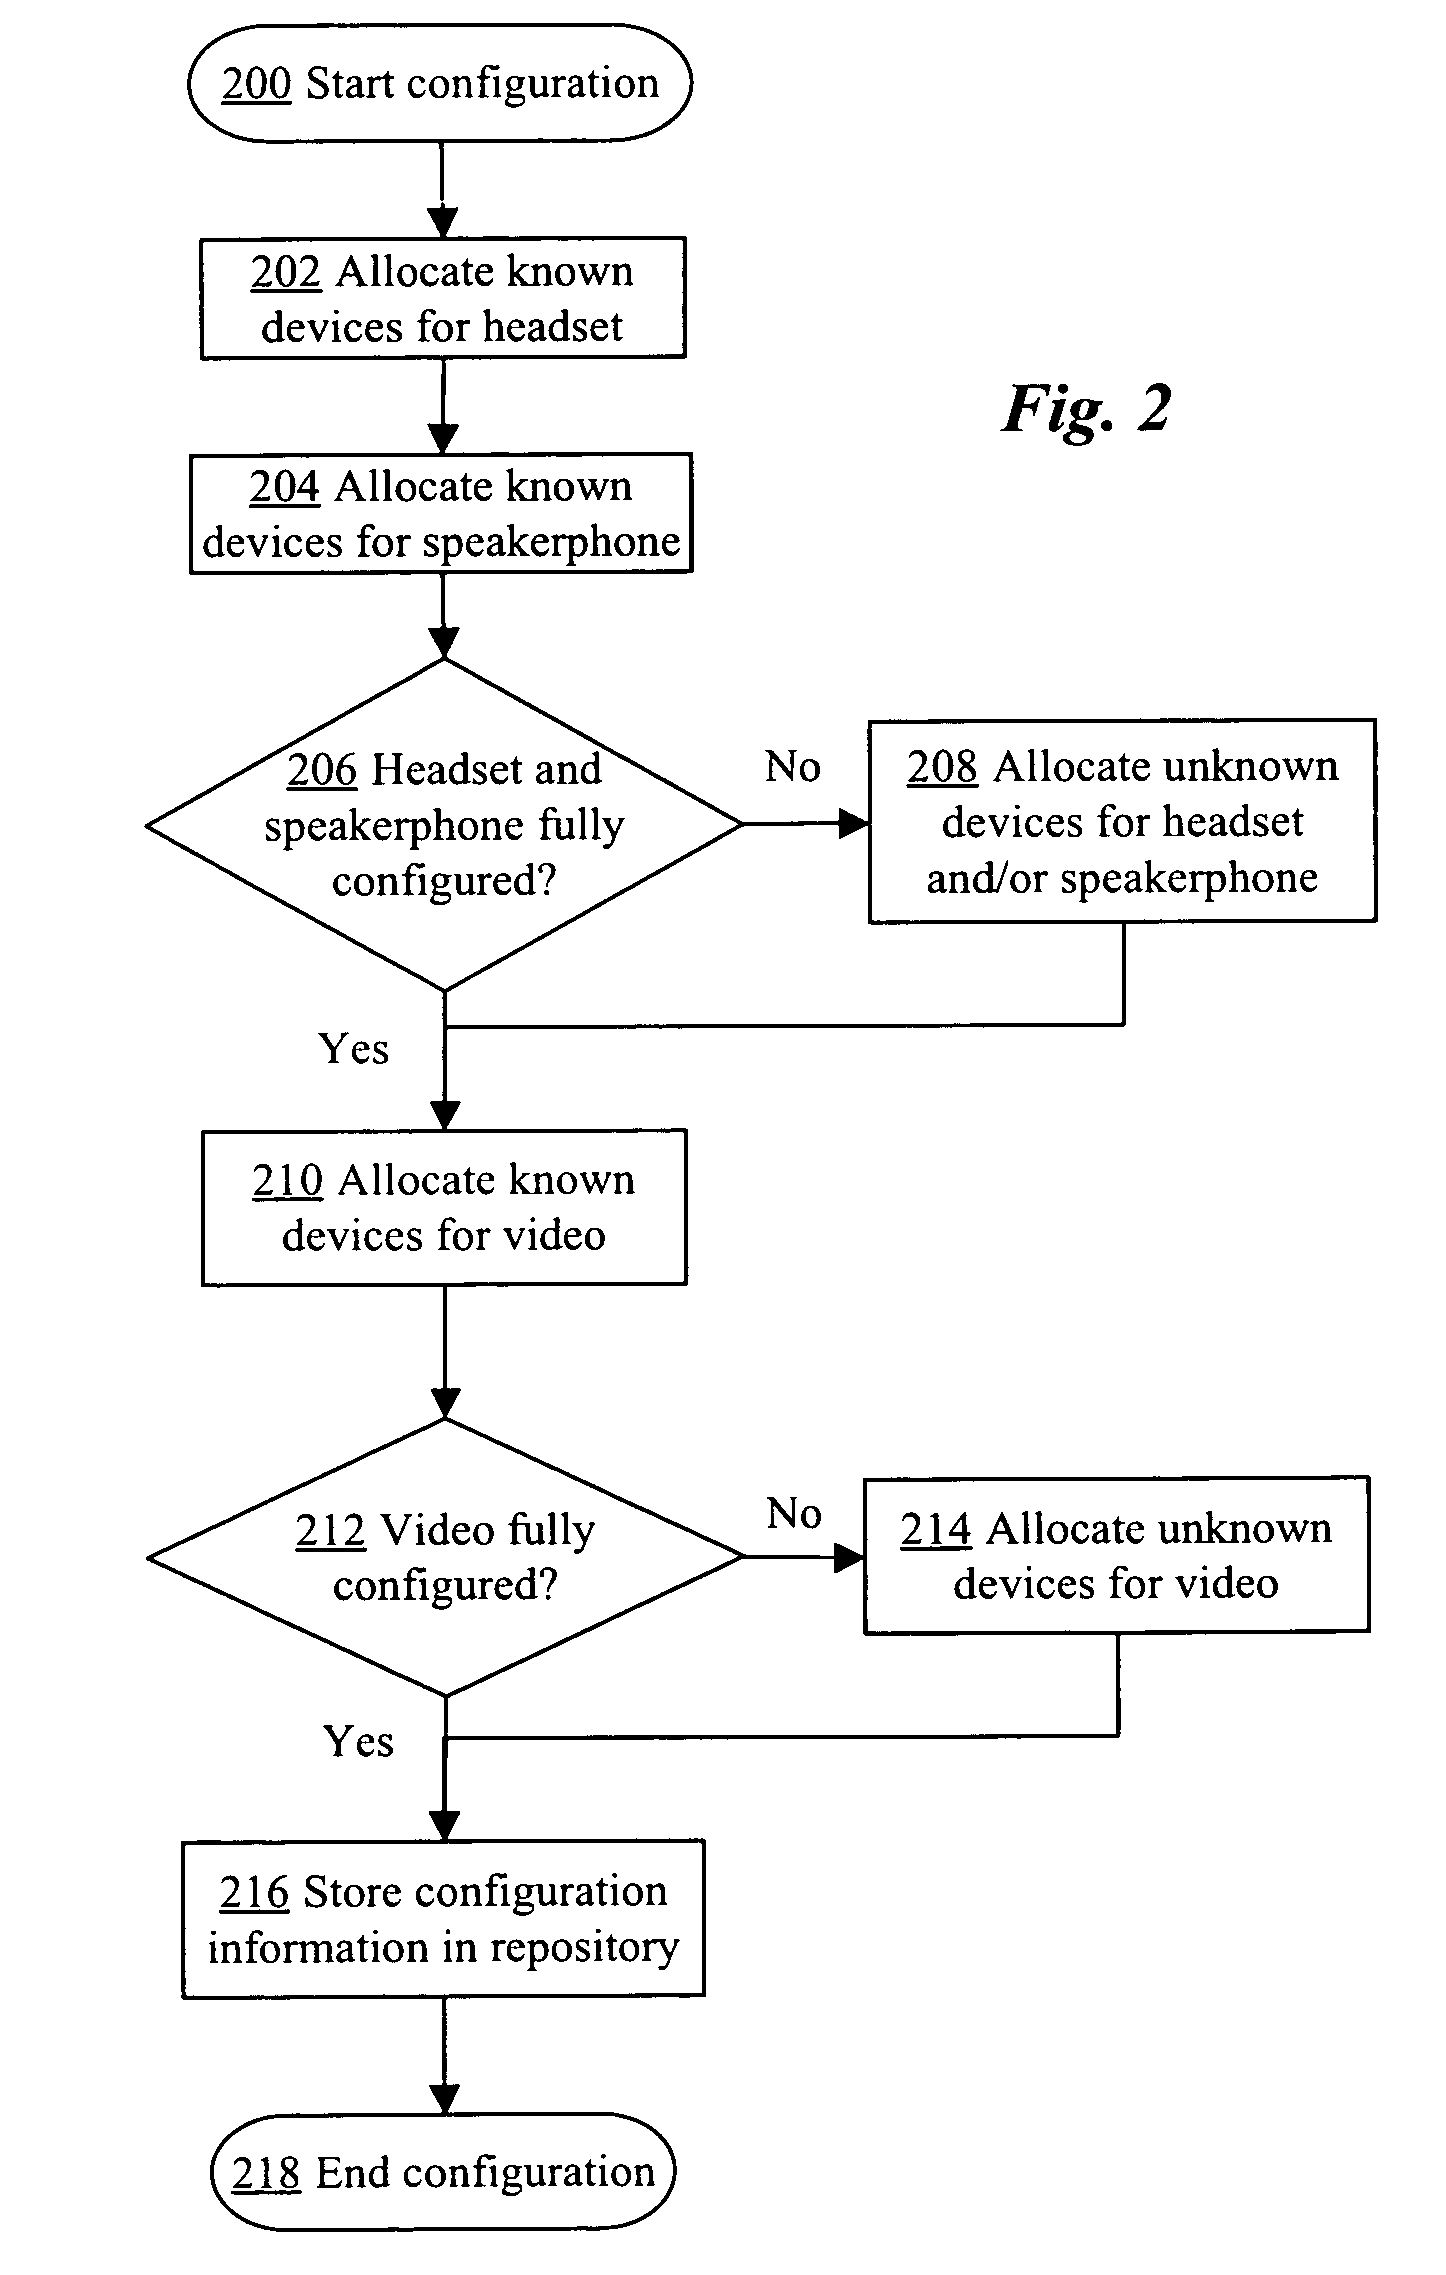 Automatic configuration of peripheral devices